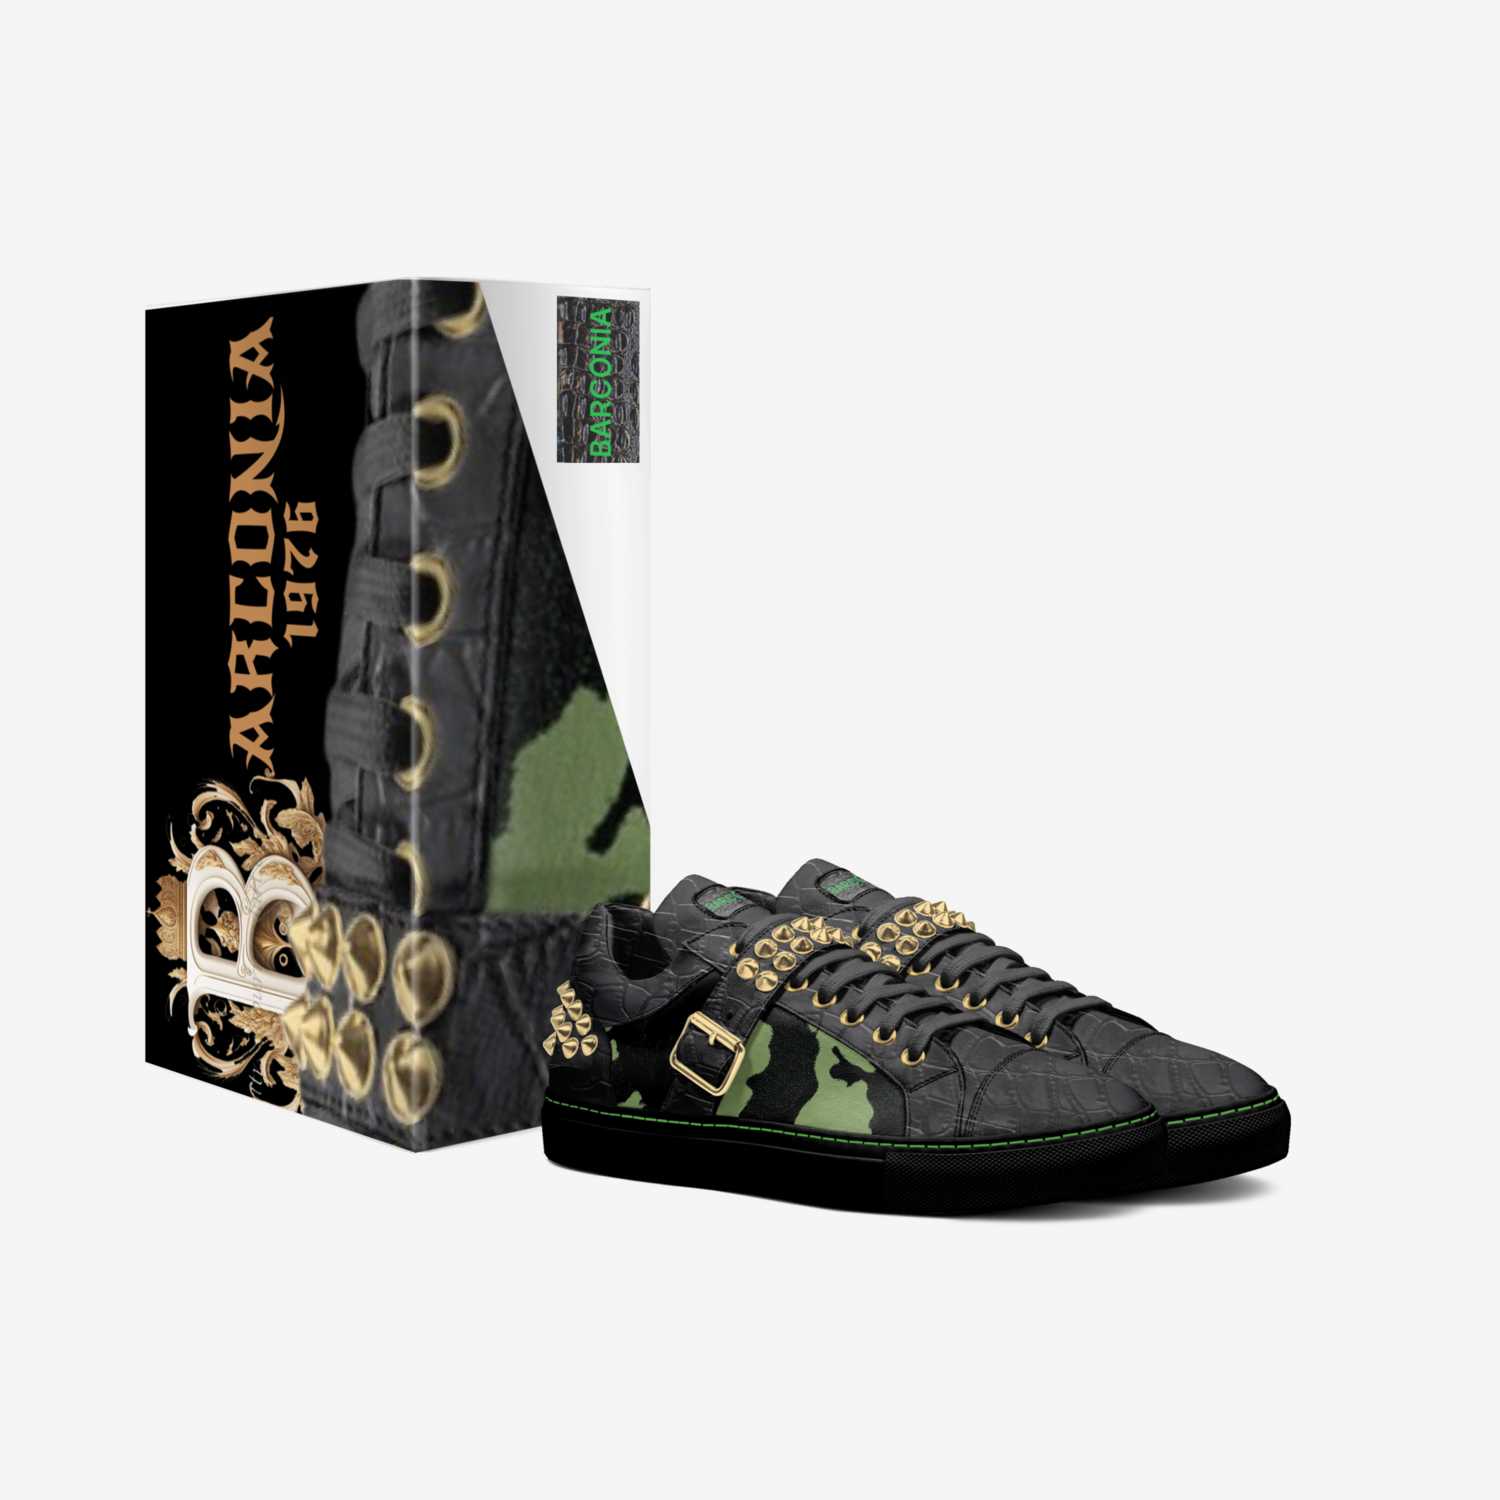 Barconia  custom made in Italy shoes by Vartise Barconia | Box view